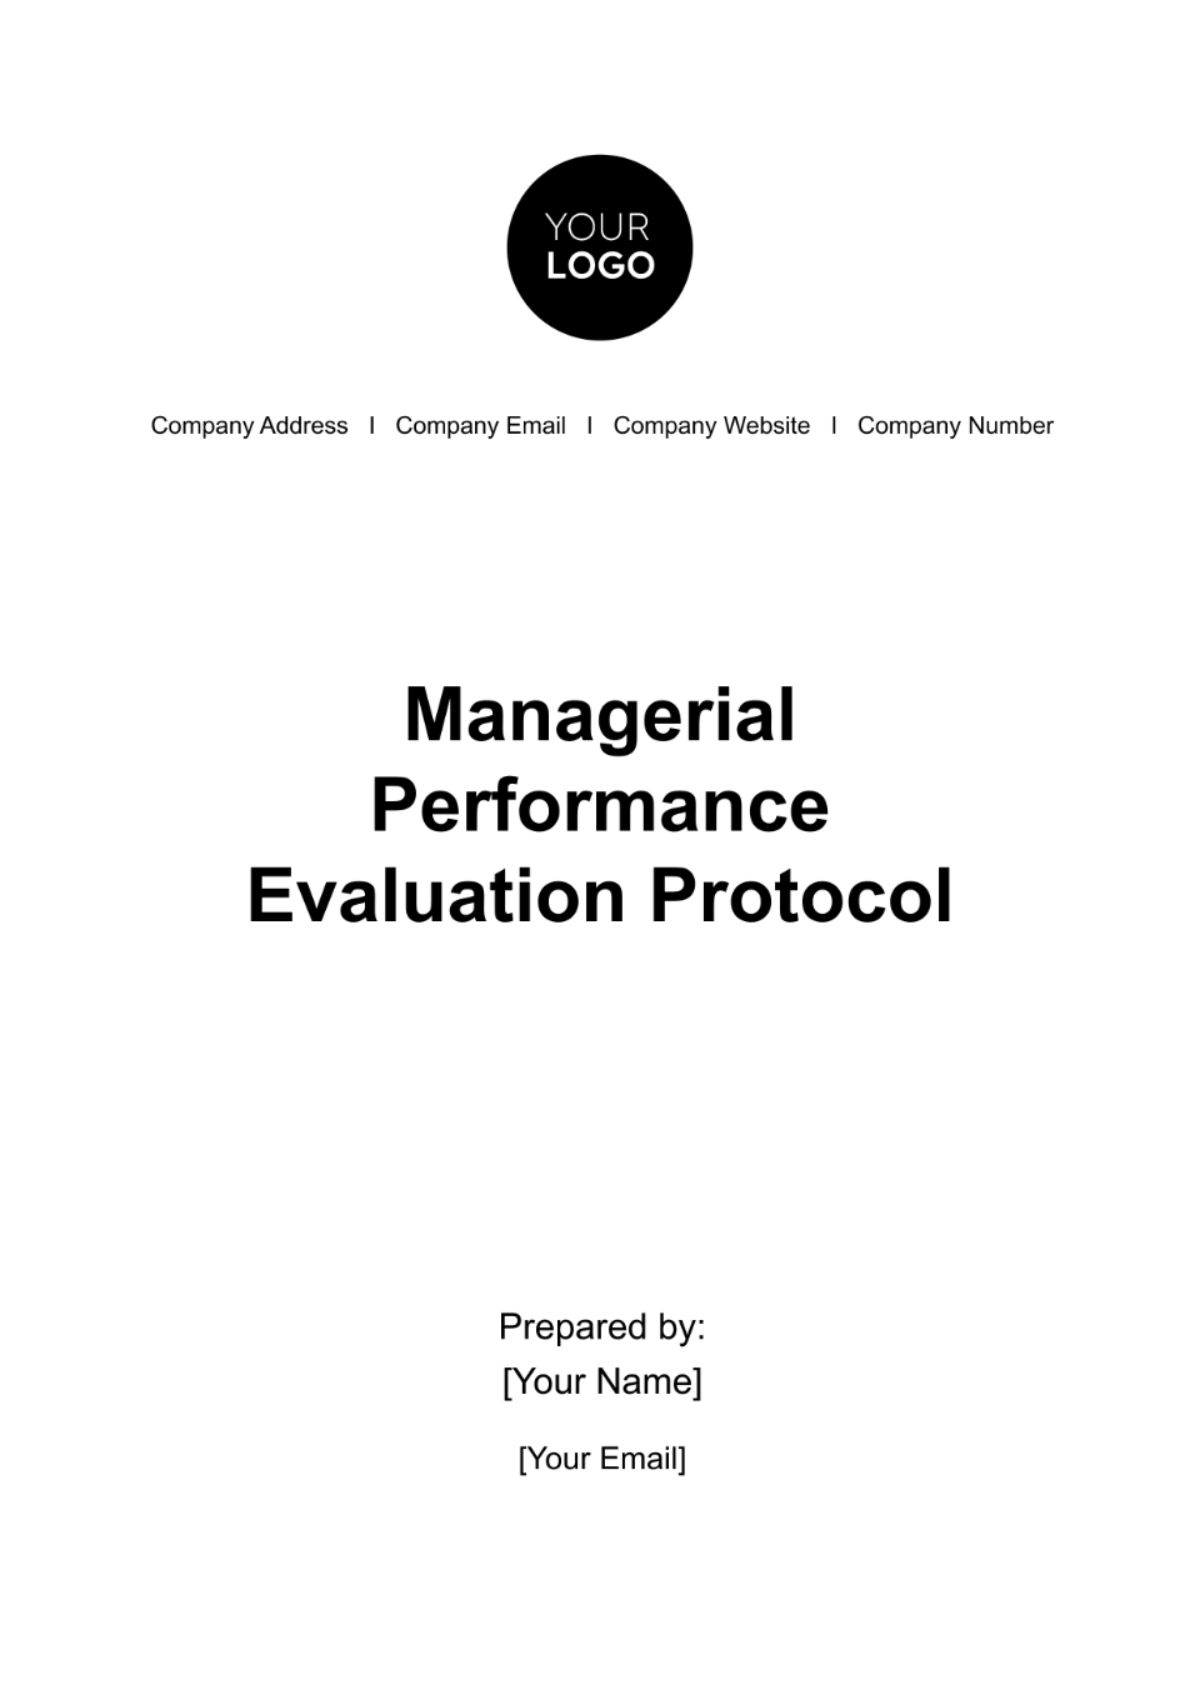 Managerial Performance Evaluation Protocol HR Template